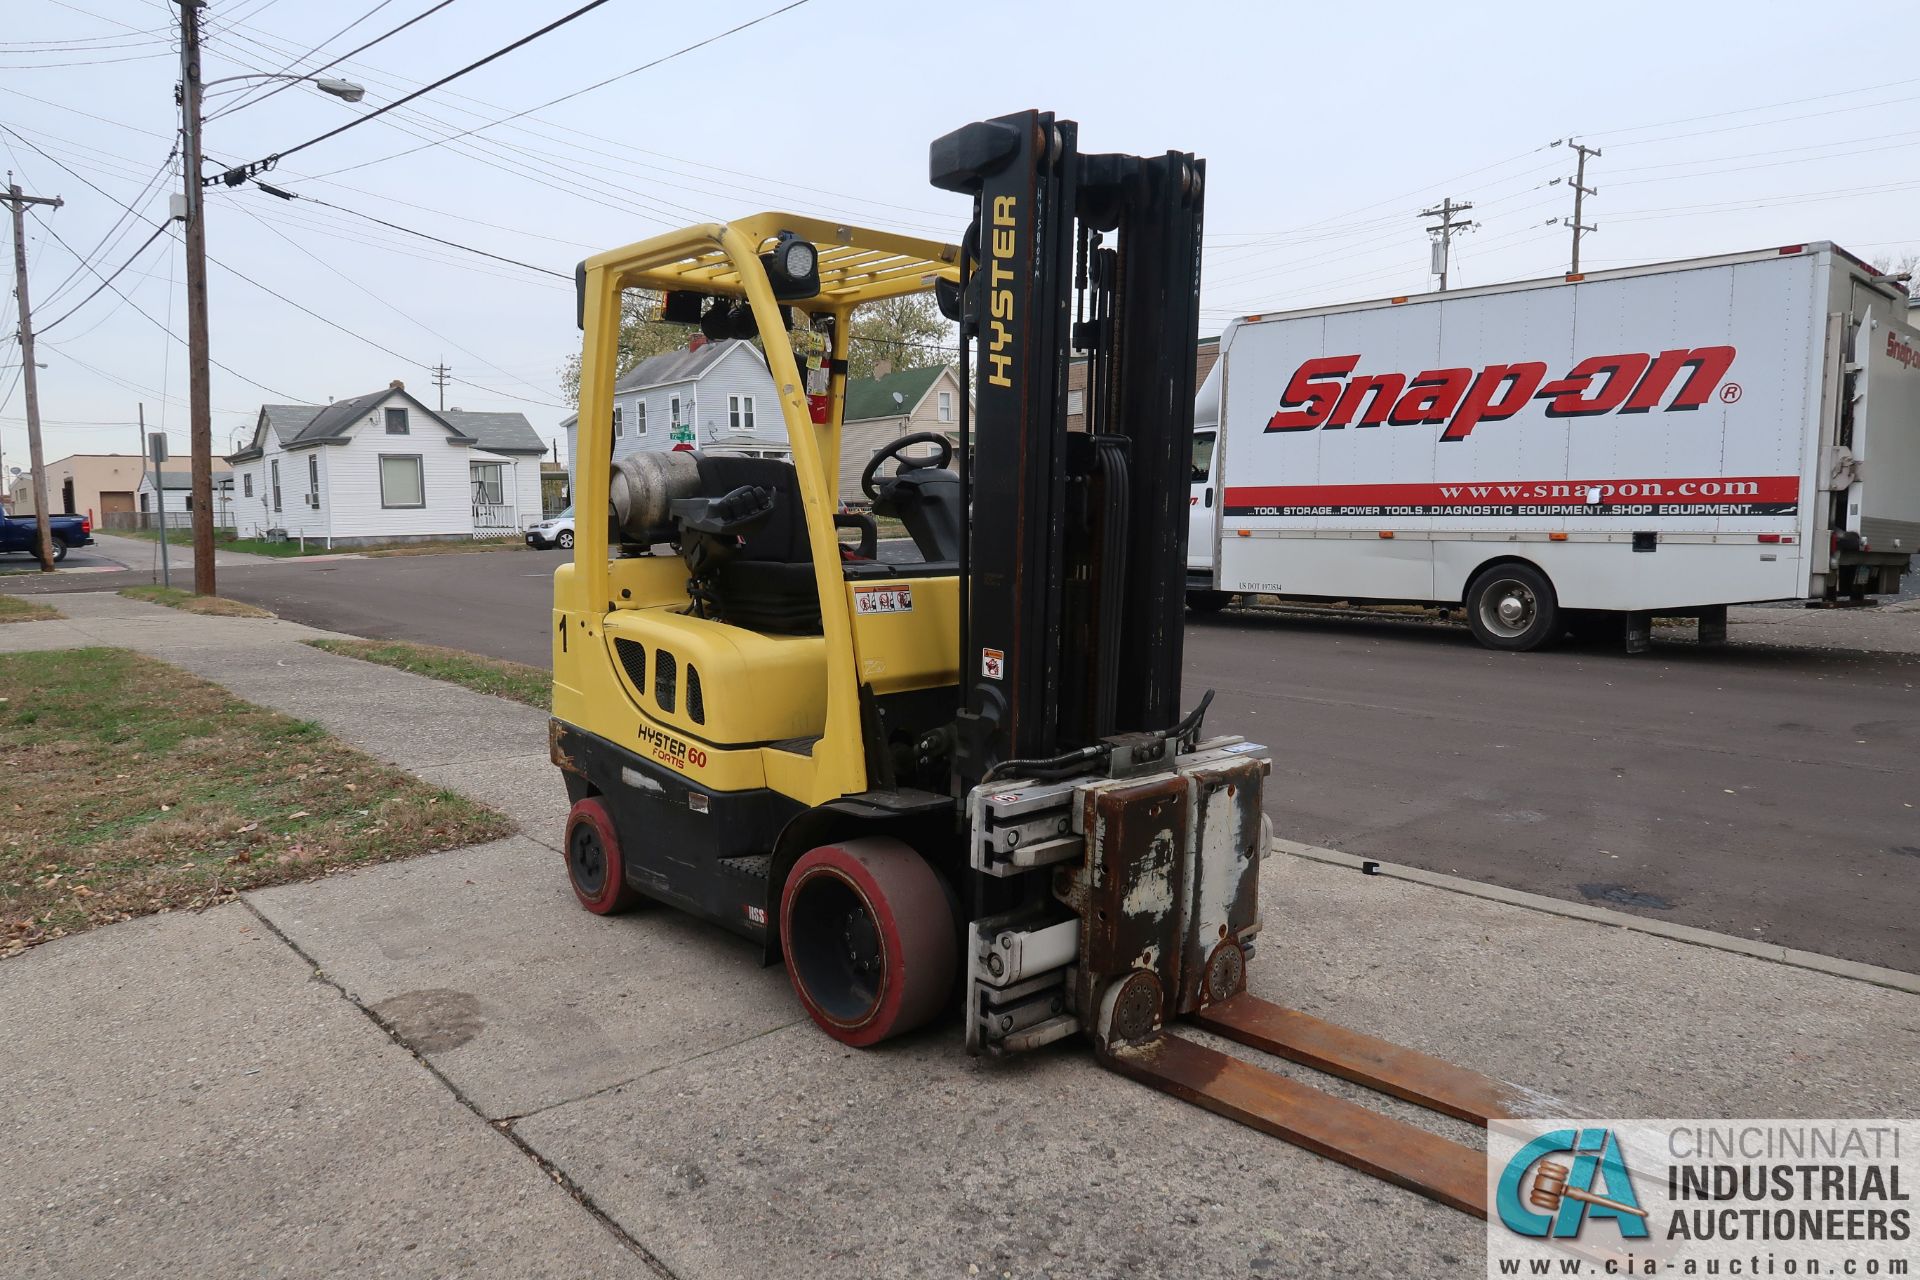 2014 - 6,000 LB. HYSTER MODEL S60FT LP GAS CUSHION TIRE THREE STAGE MAST LIFT TRUCK; S/N - Image 2 of 14